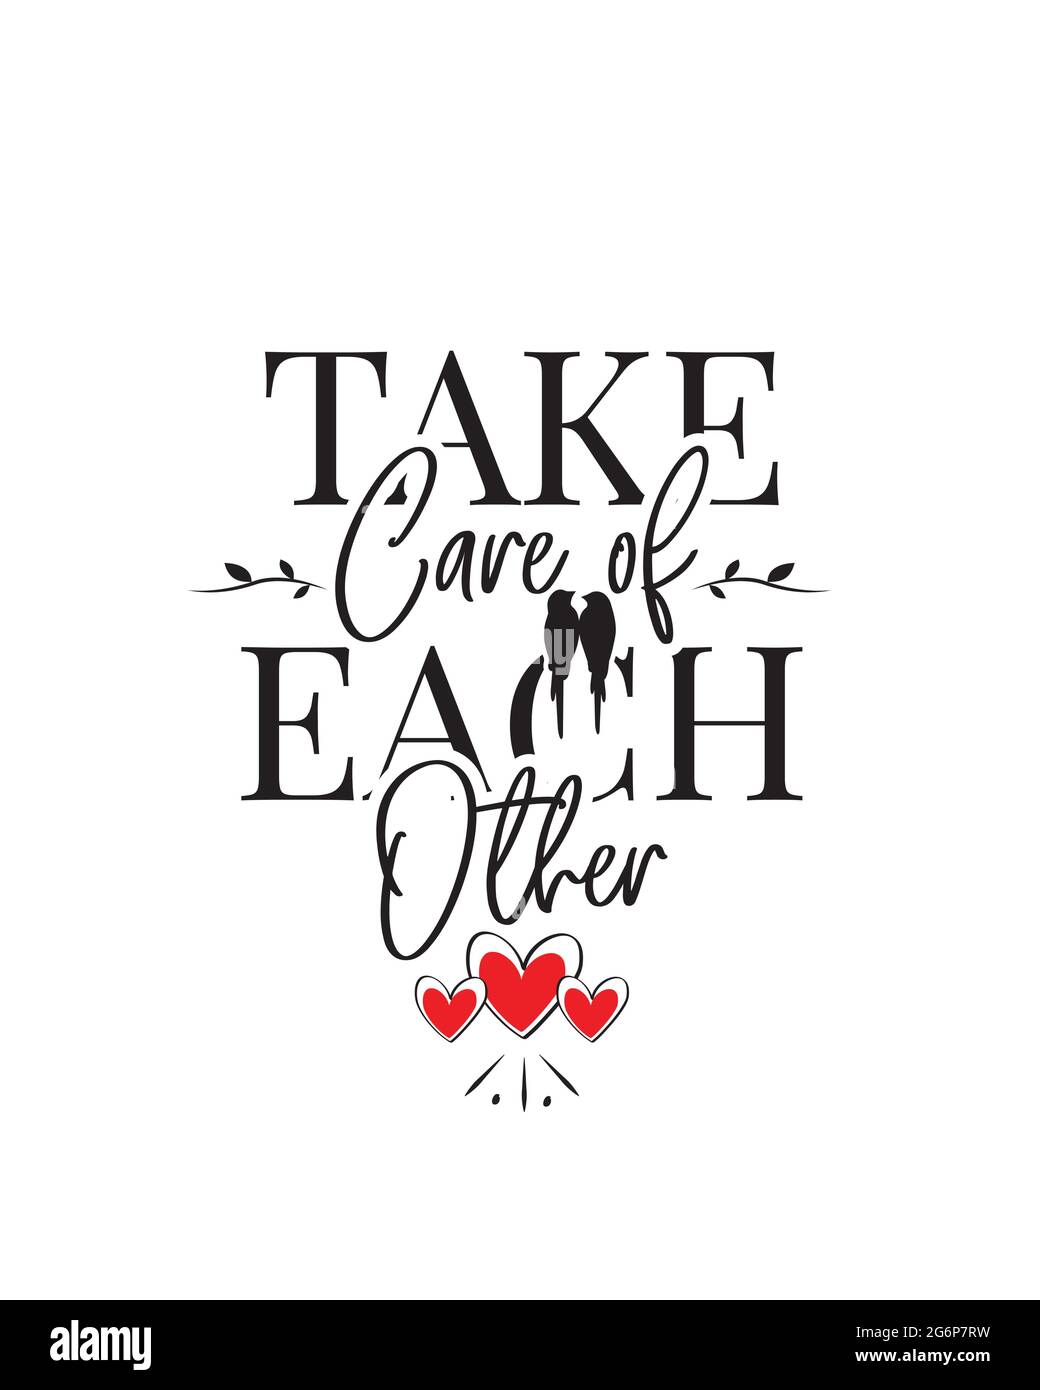 Take care of each other, vector. Motivational, inspirational life quotes. Wording design isolated on white background, lettering. Wall decals, wall ar Stock Vector